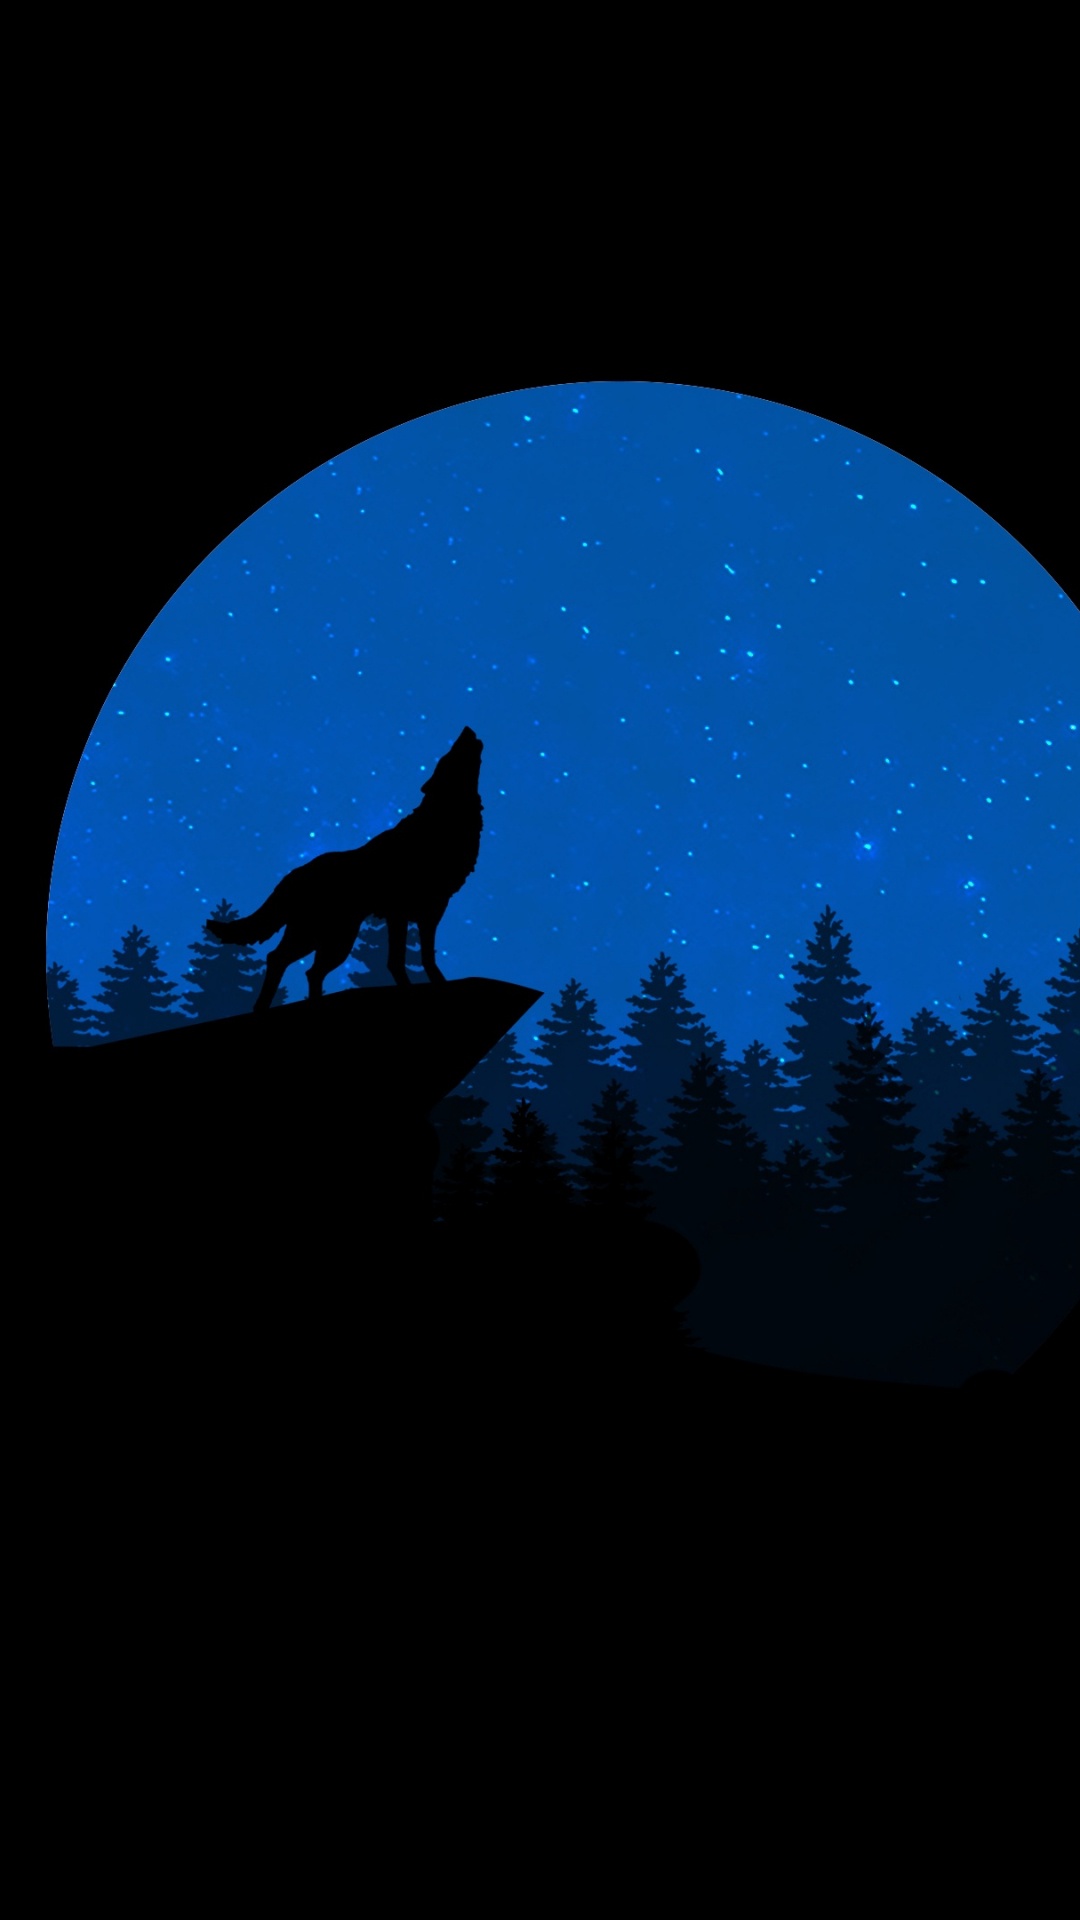 Silhouette of Person Standing Under Blue Moon. Wallpaper in 1080x1920 Resolution